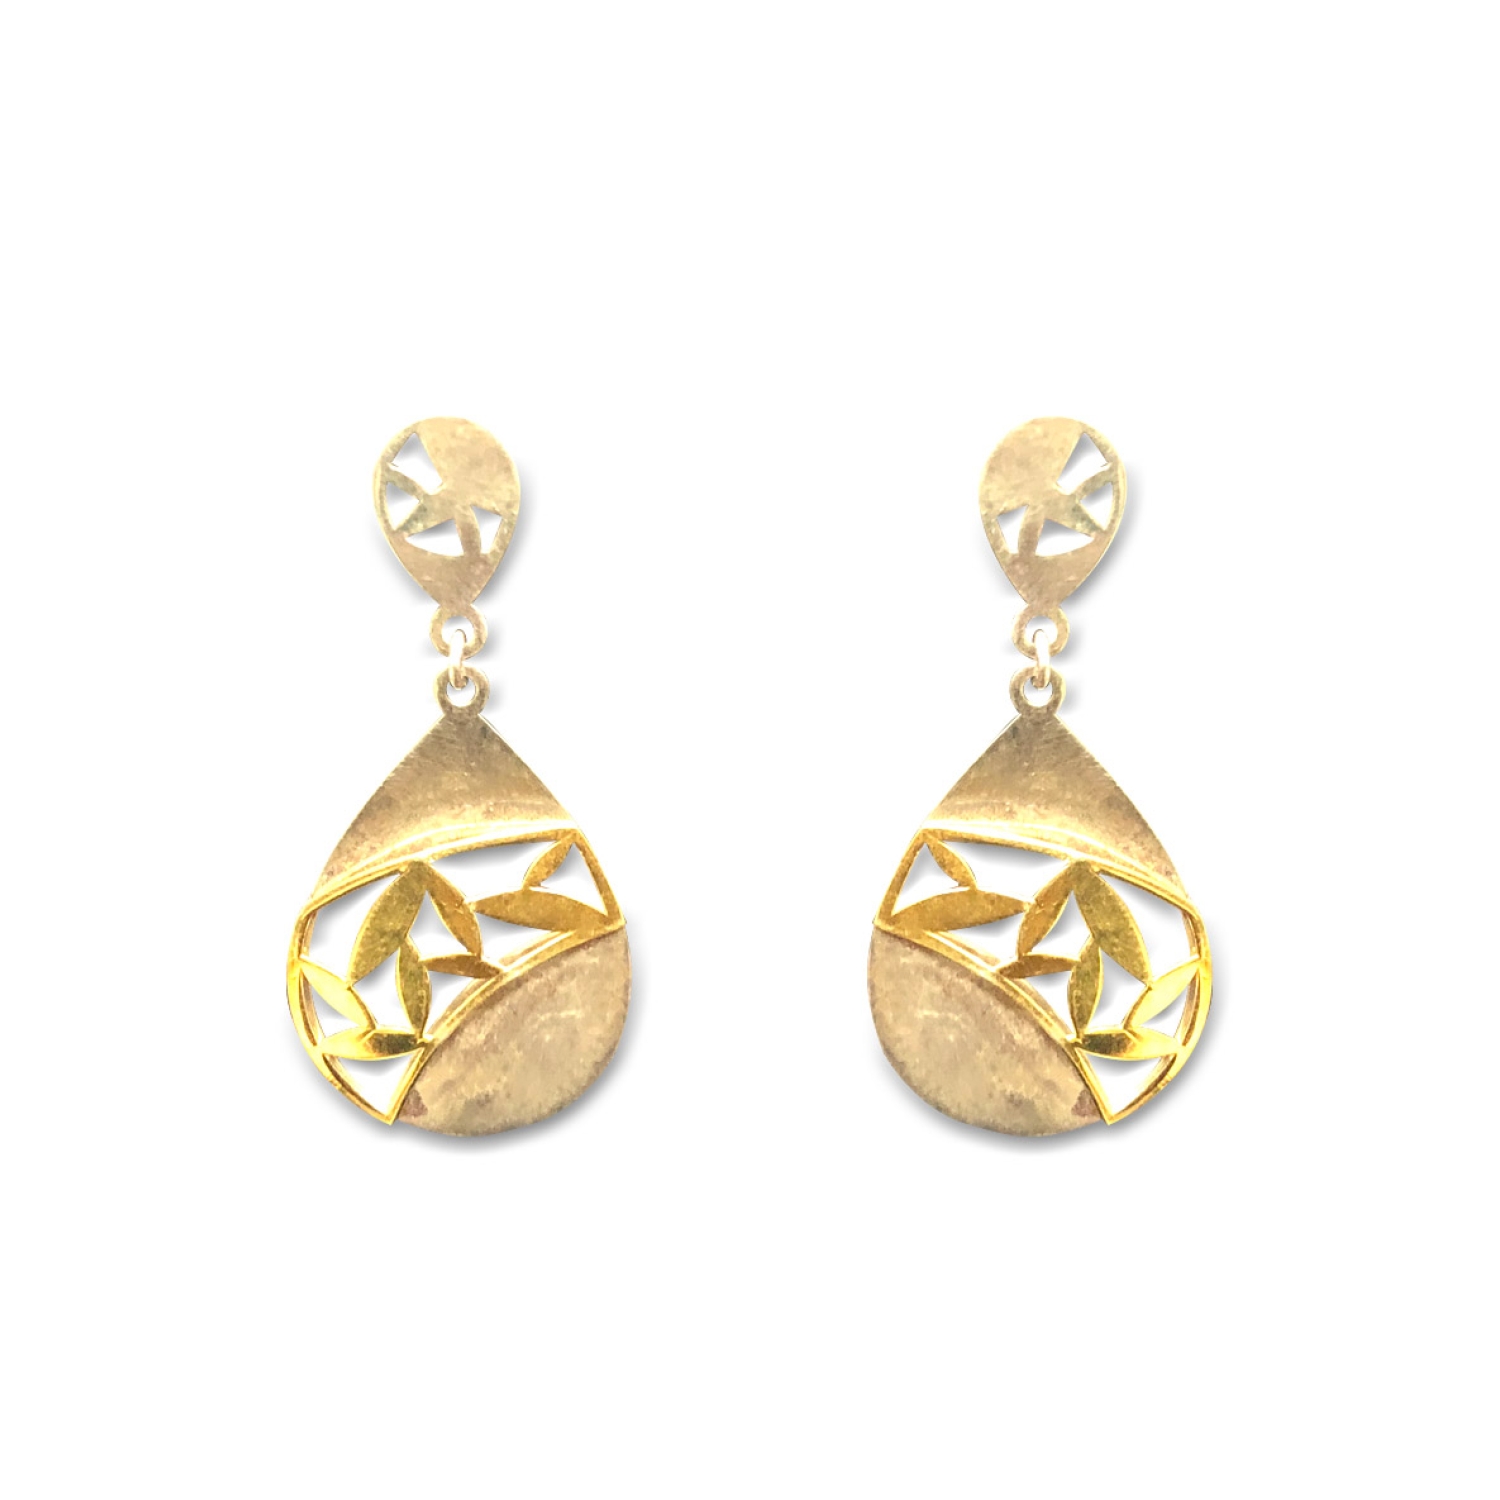 Shop For Womens Hoop Earrings Online At Best Prices  LBB